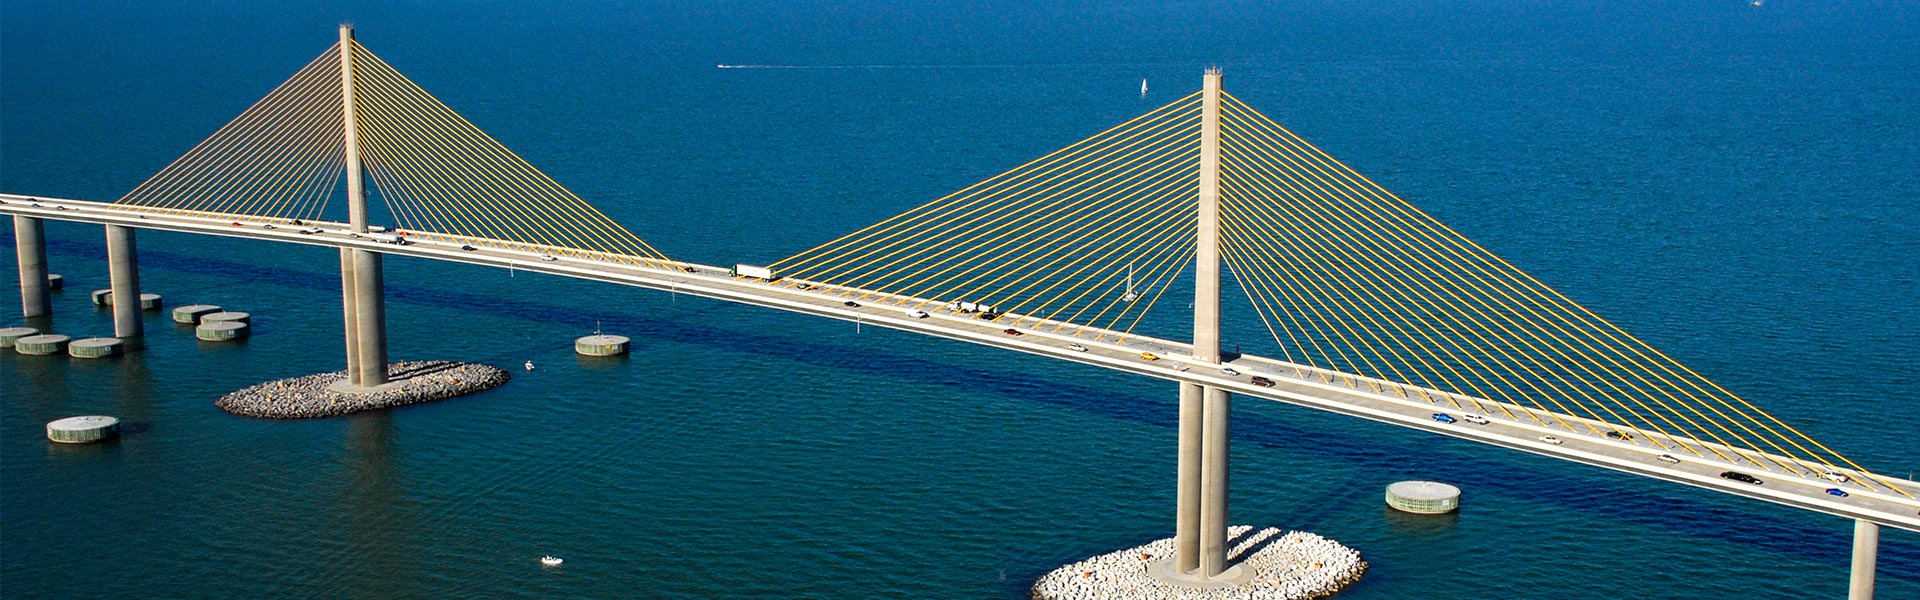 ss-city-service-sunshine-skyway-bridge-8a-dbe-certified-general-construction-telecom-construction-underground-utility-supply-contractor-11